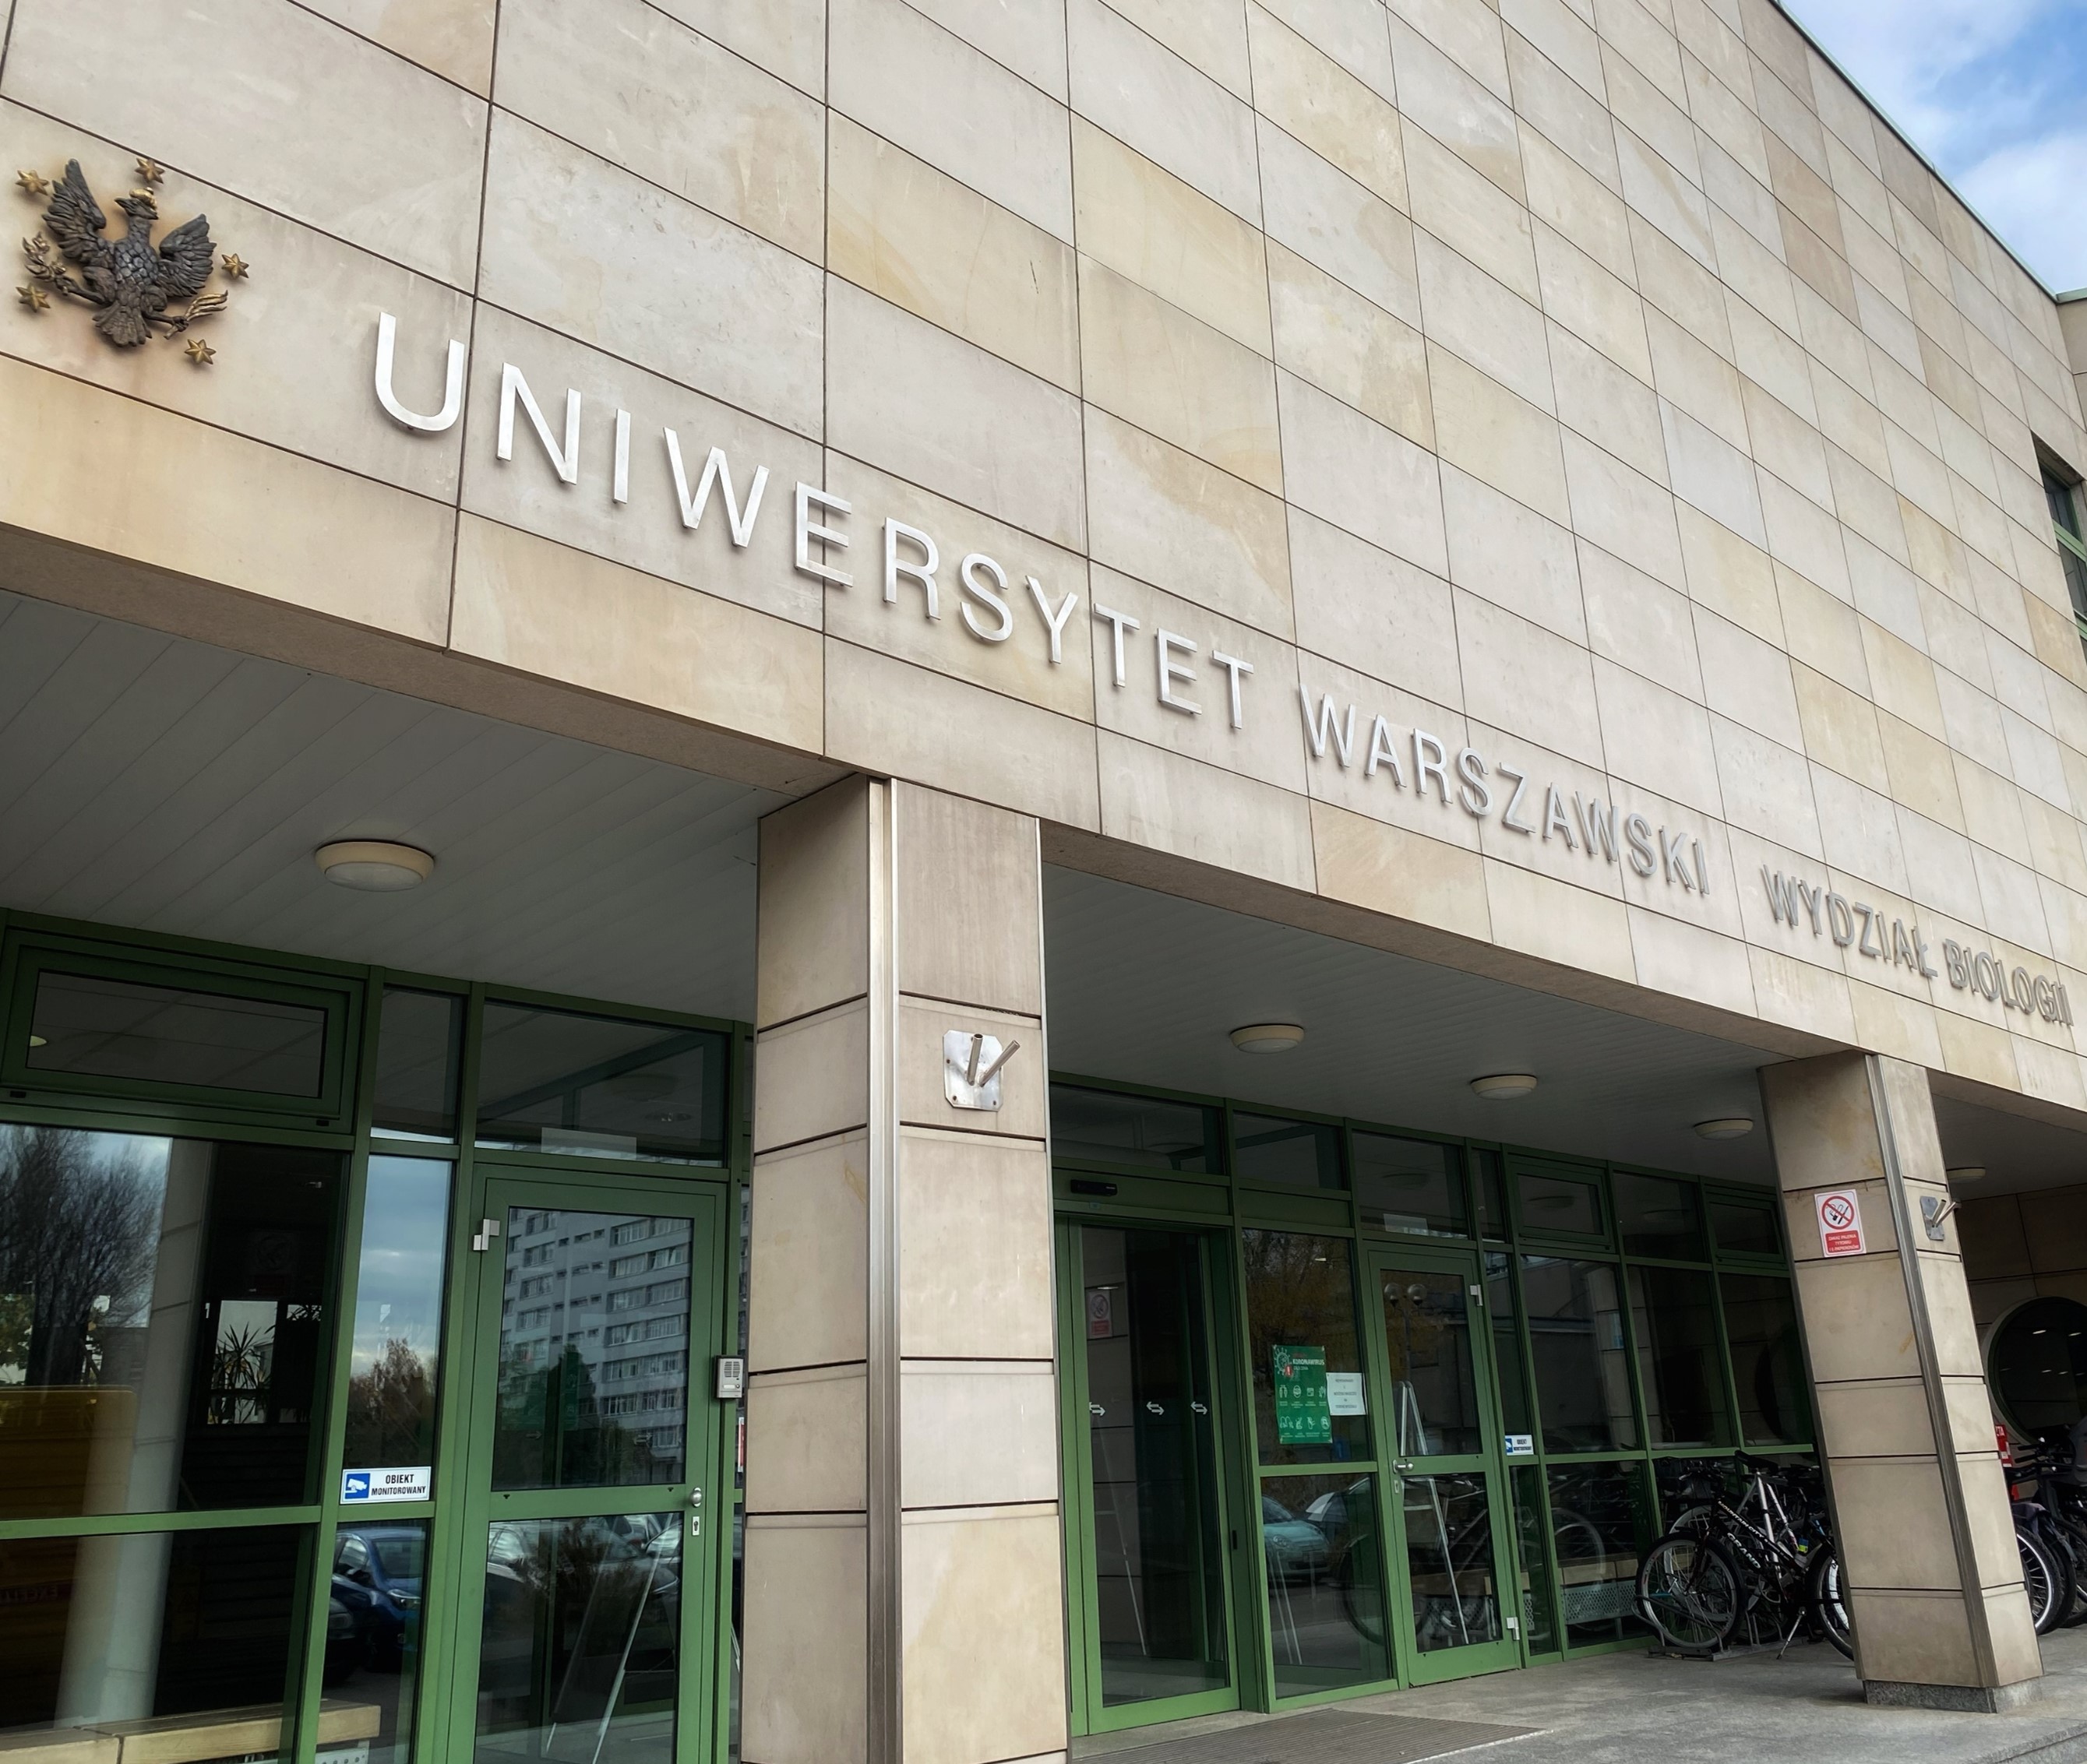 Entrance to the Faculty of Biology, University of Warsaw